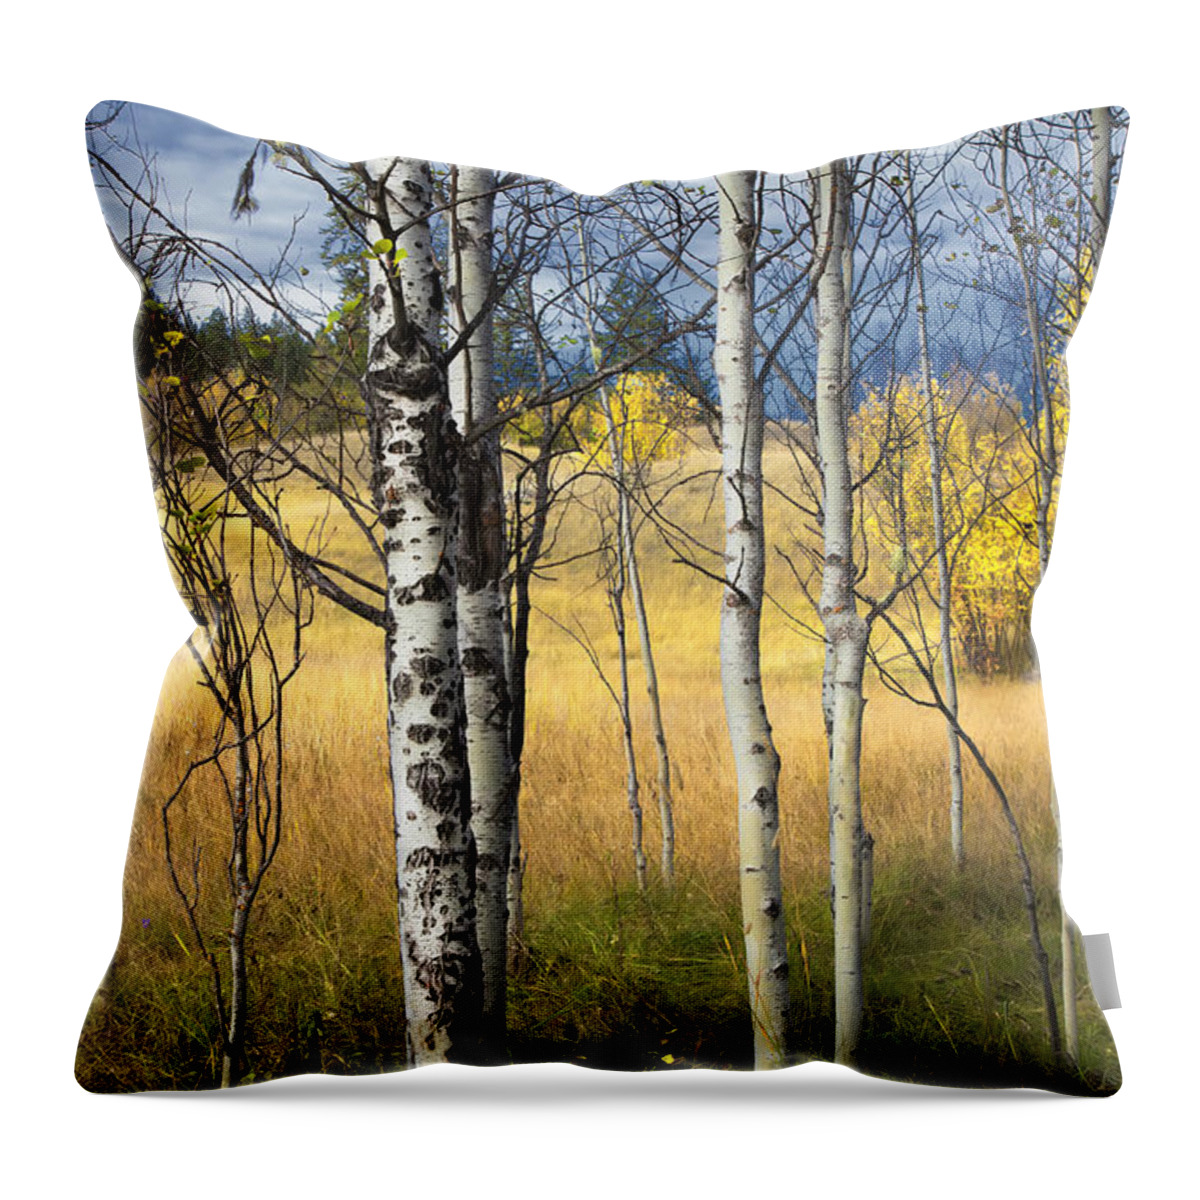 Autumn Throw Pillow featuring the photograph Autumn Landscape by Theresa Tahara